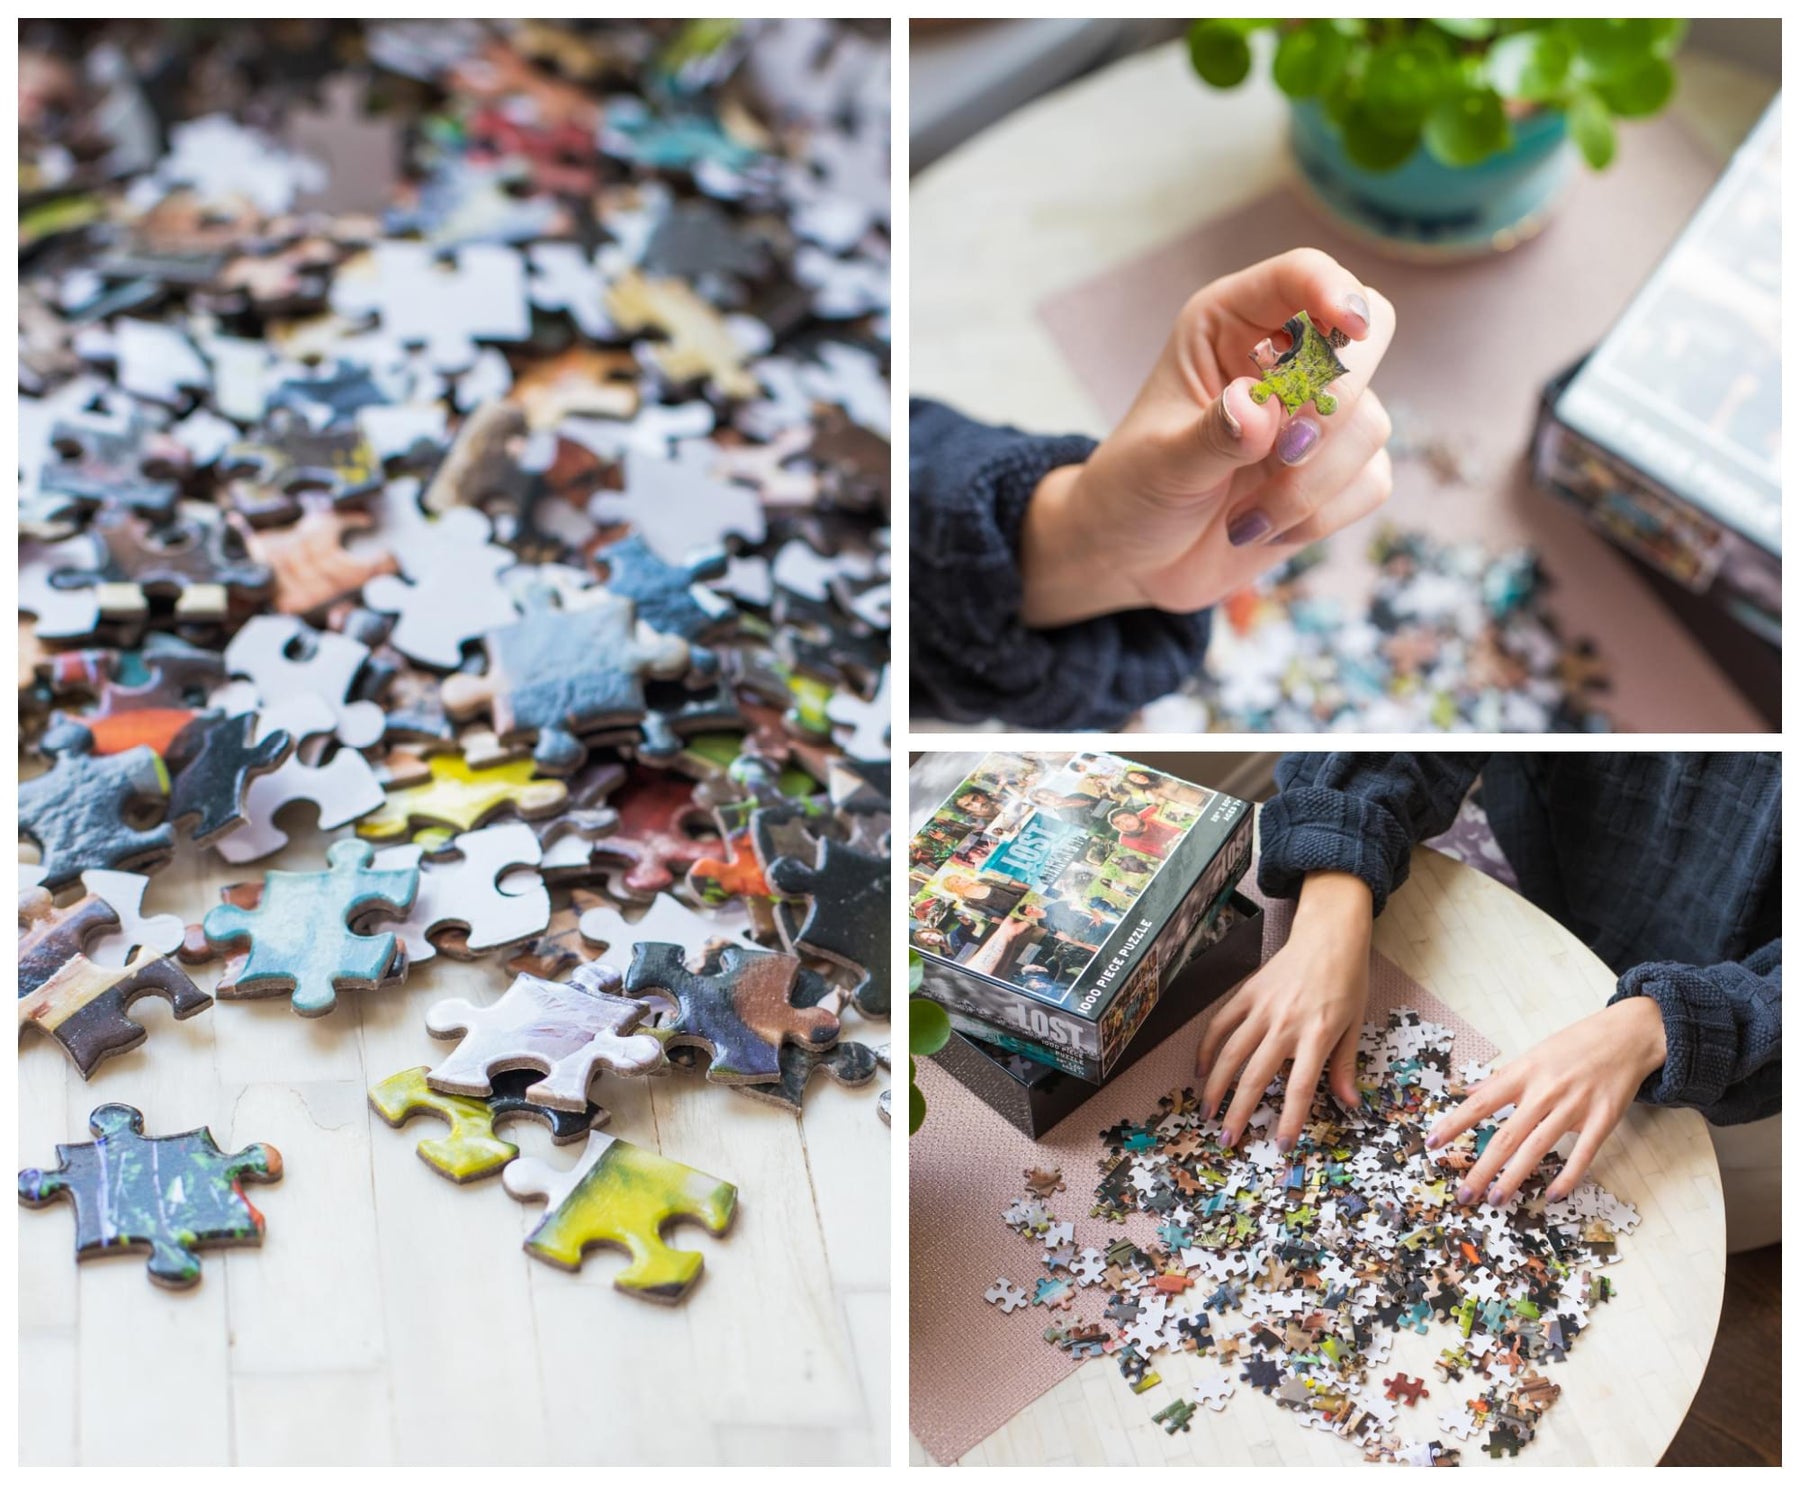 LOST Collage Puzzle For Adults And Kids | 1000 Piece Jigsaw Puzzle